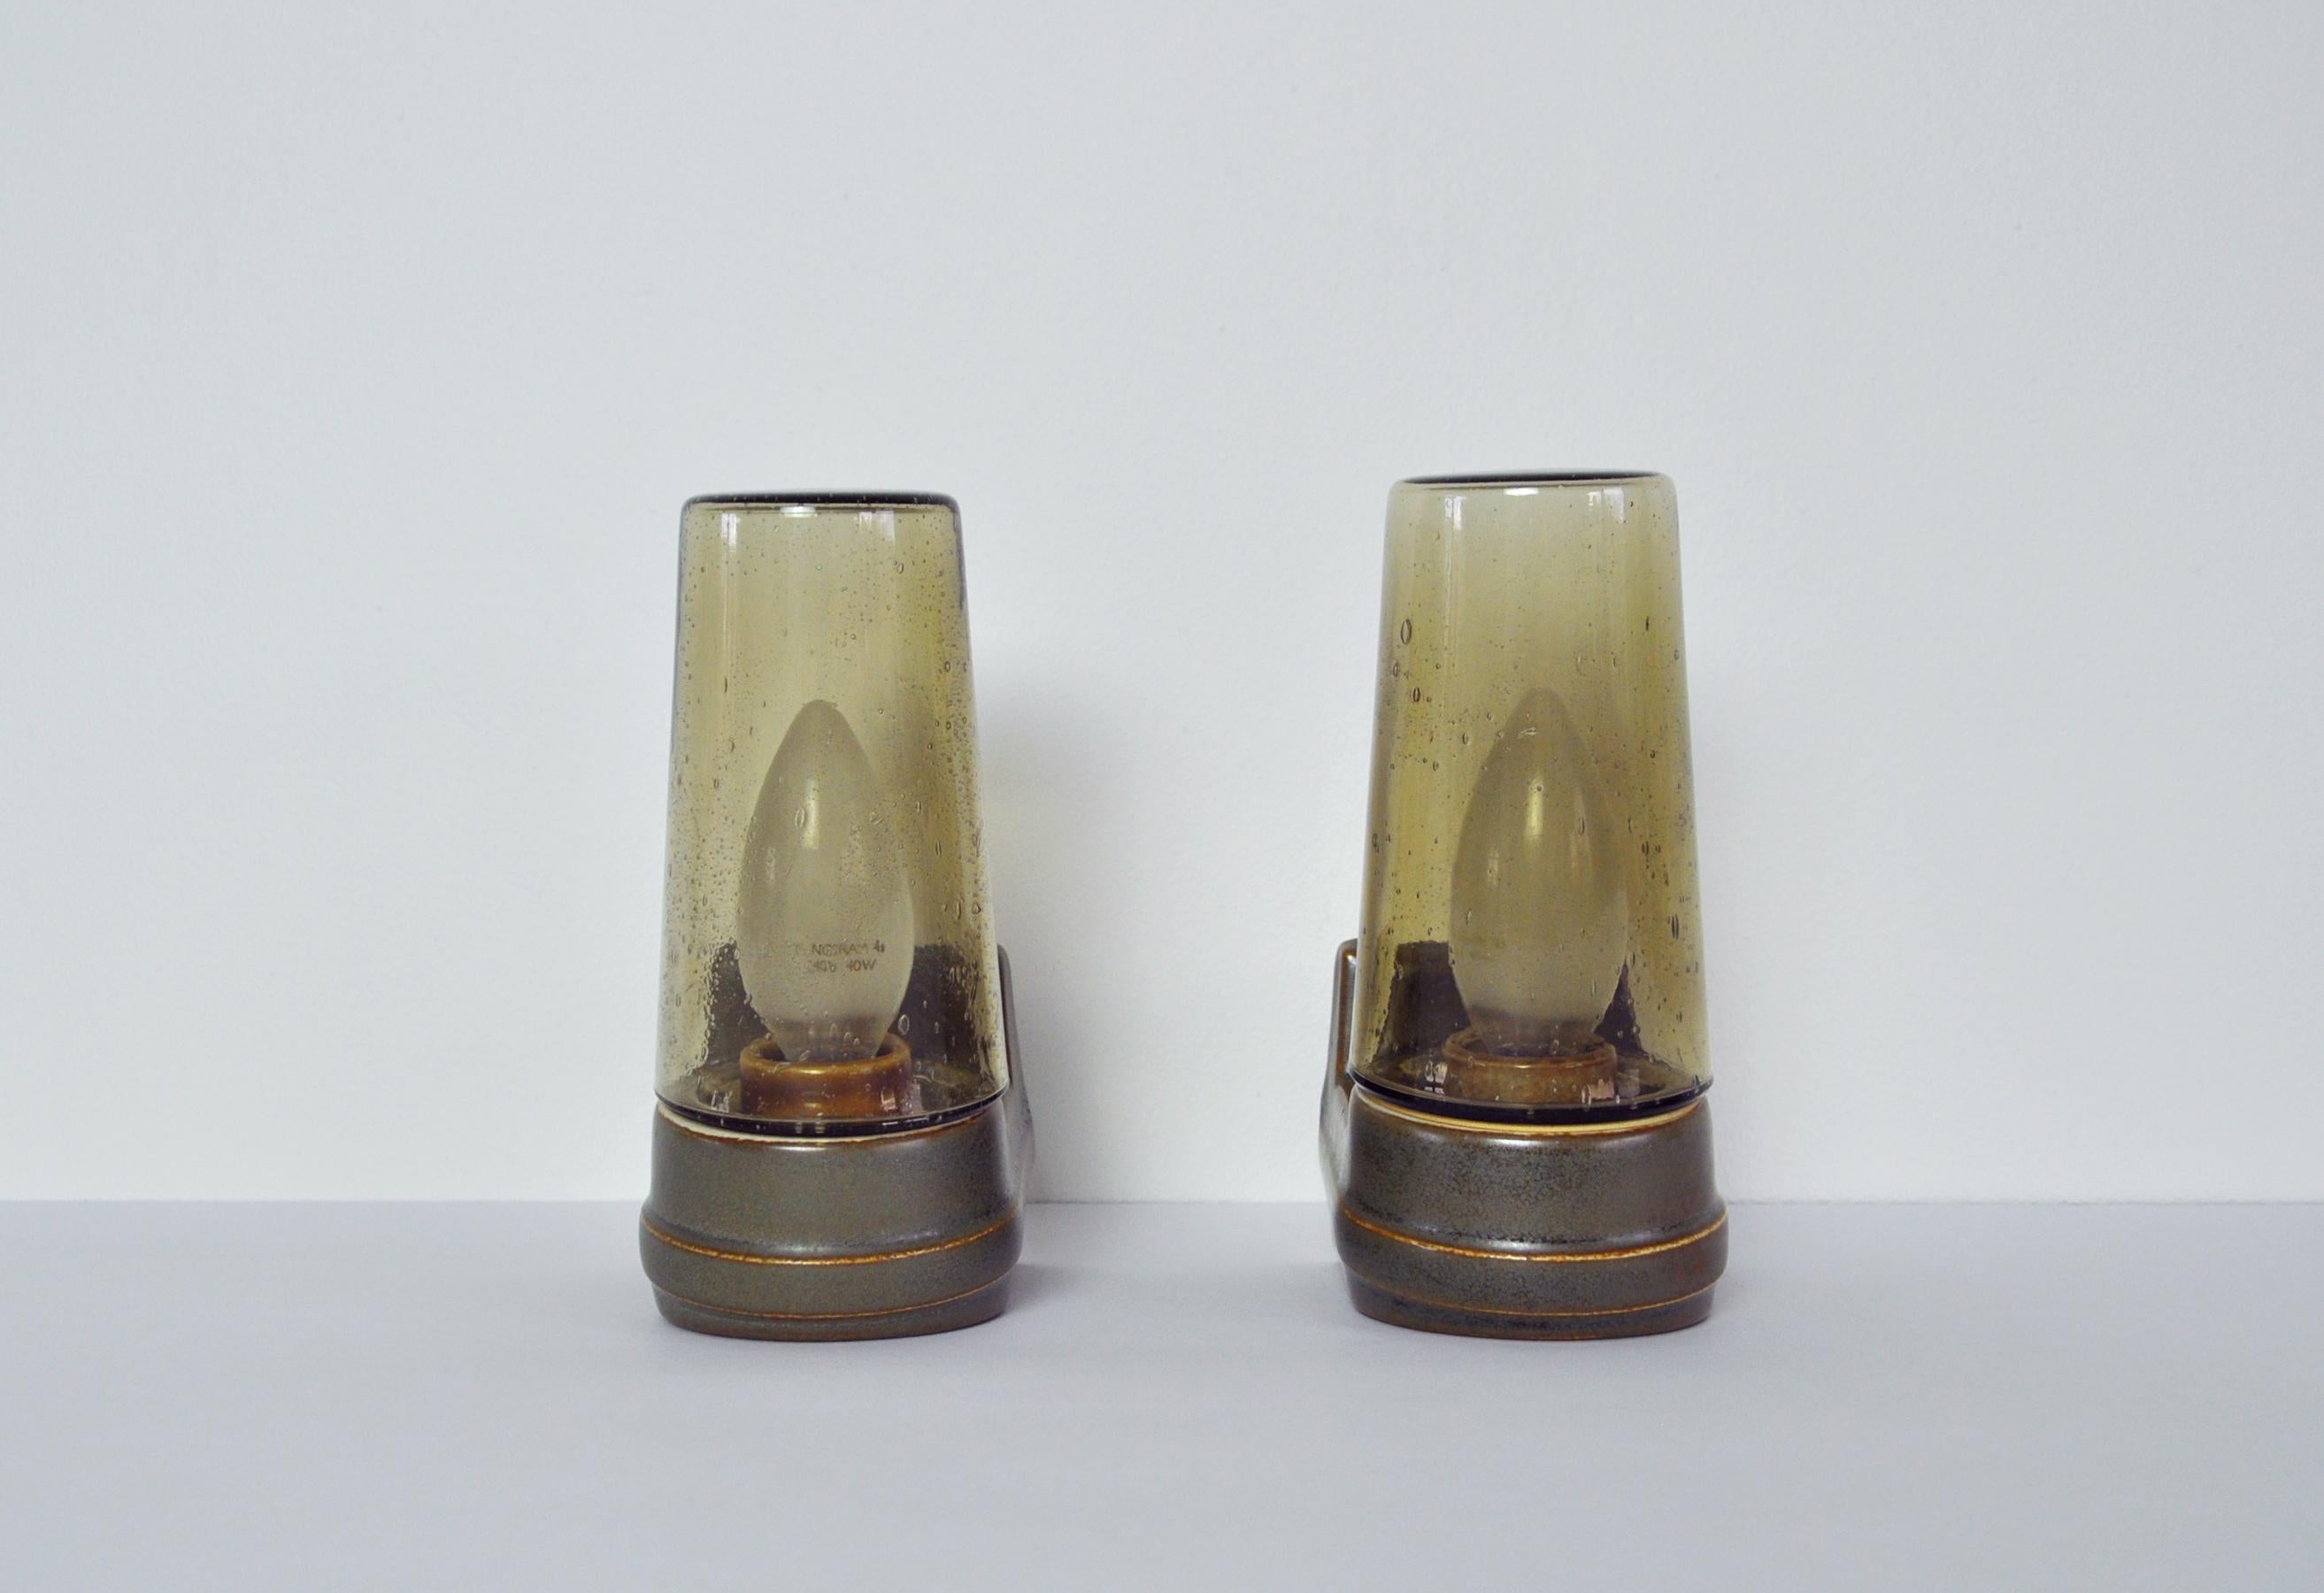 Scandinavian Modern glazed porcelain in green and brown tones combined with colored glass design by Sigvard Bernadotte for IFÖ, Sweden, 1960s.

Light source: E14 / E12 Edison screw fitting max 40W. Made for wet areas such as bathrooms, but